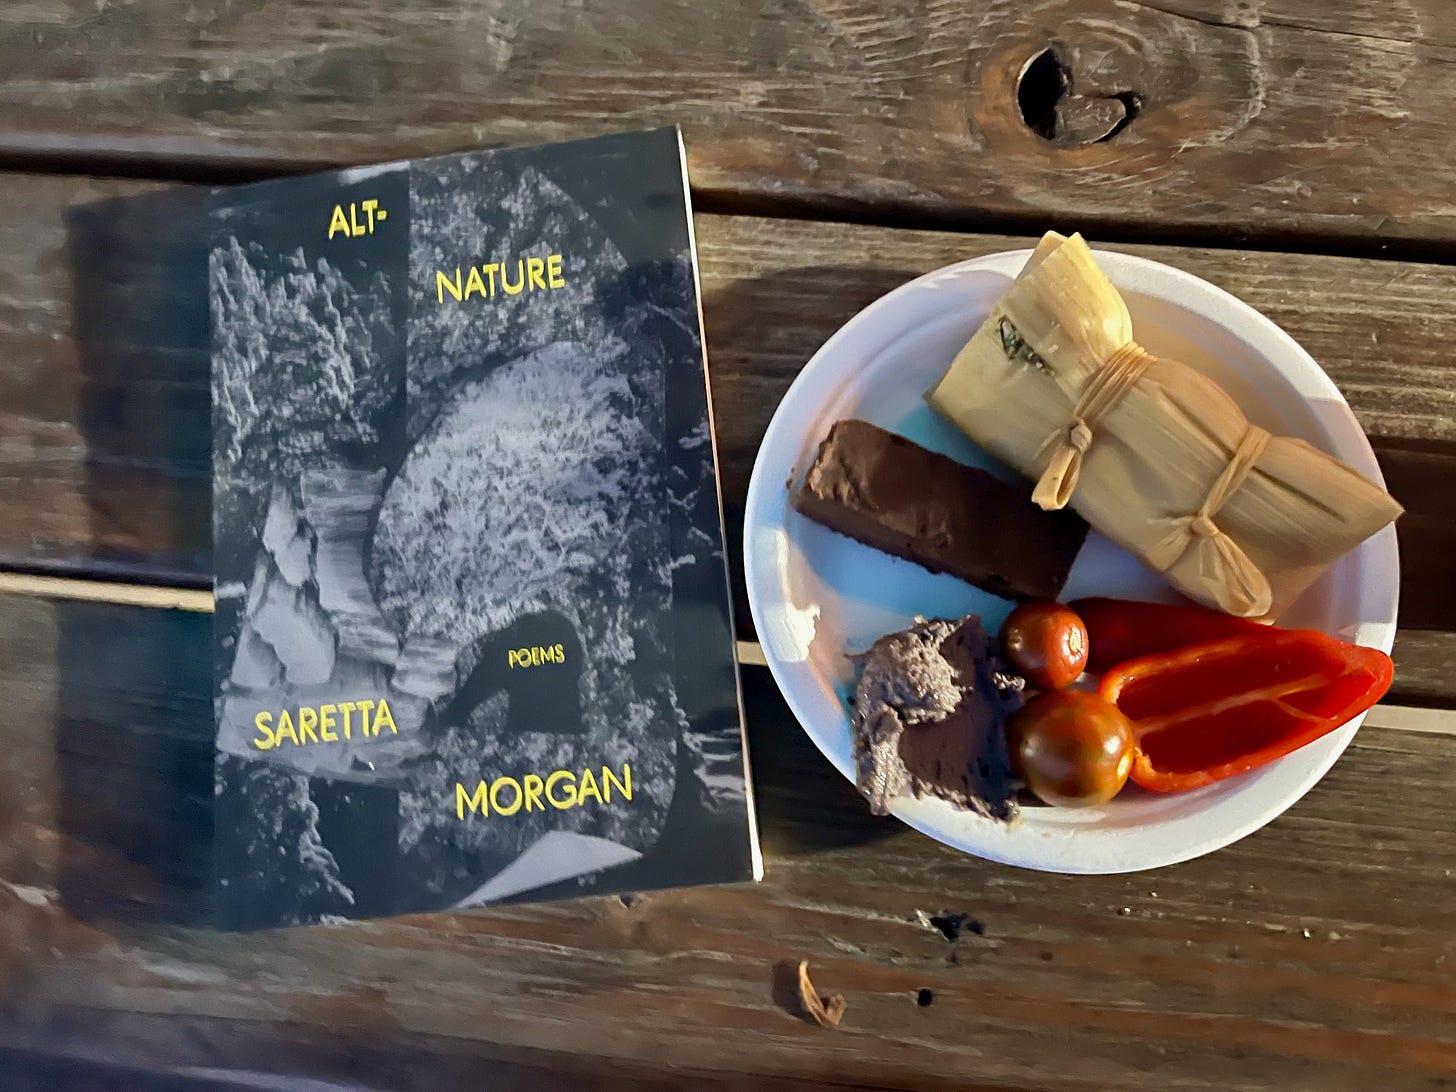 a picnic table with my copy of alt-nature, and my plate of tamales, bean dip, vegetables and a brownie